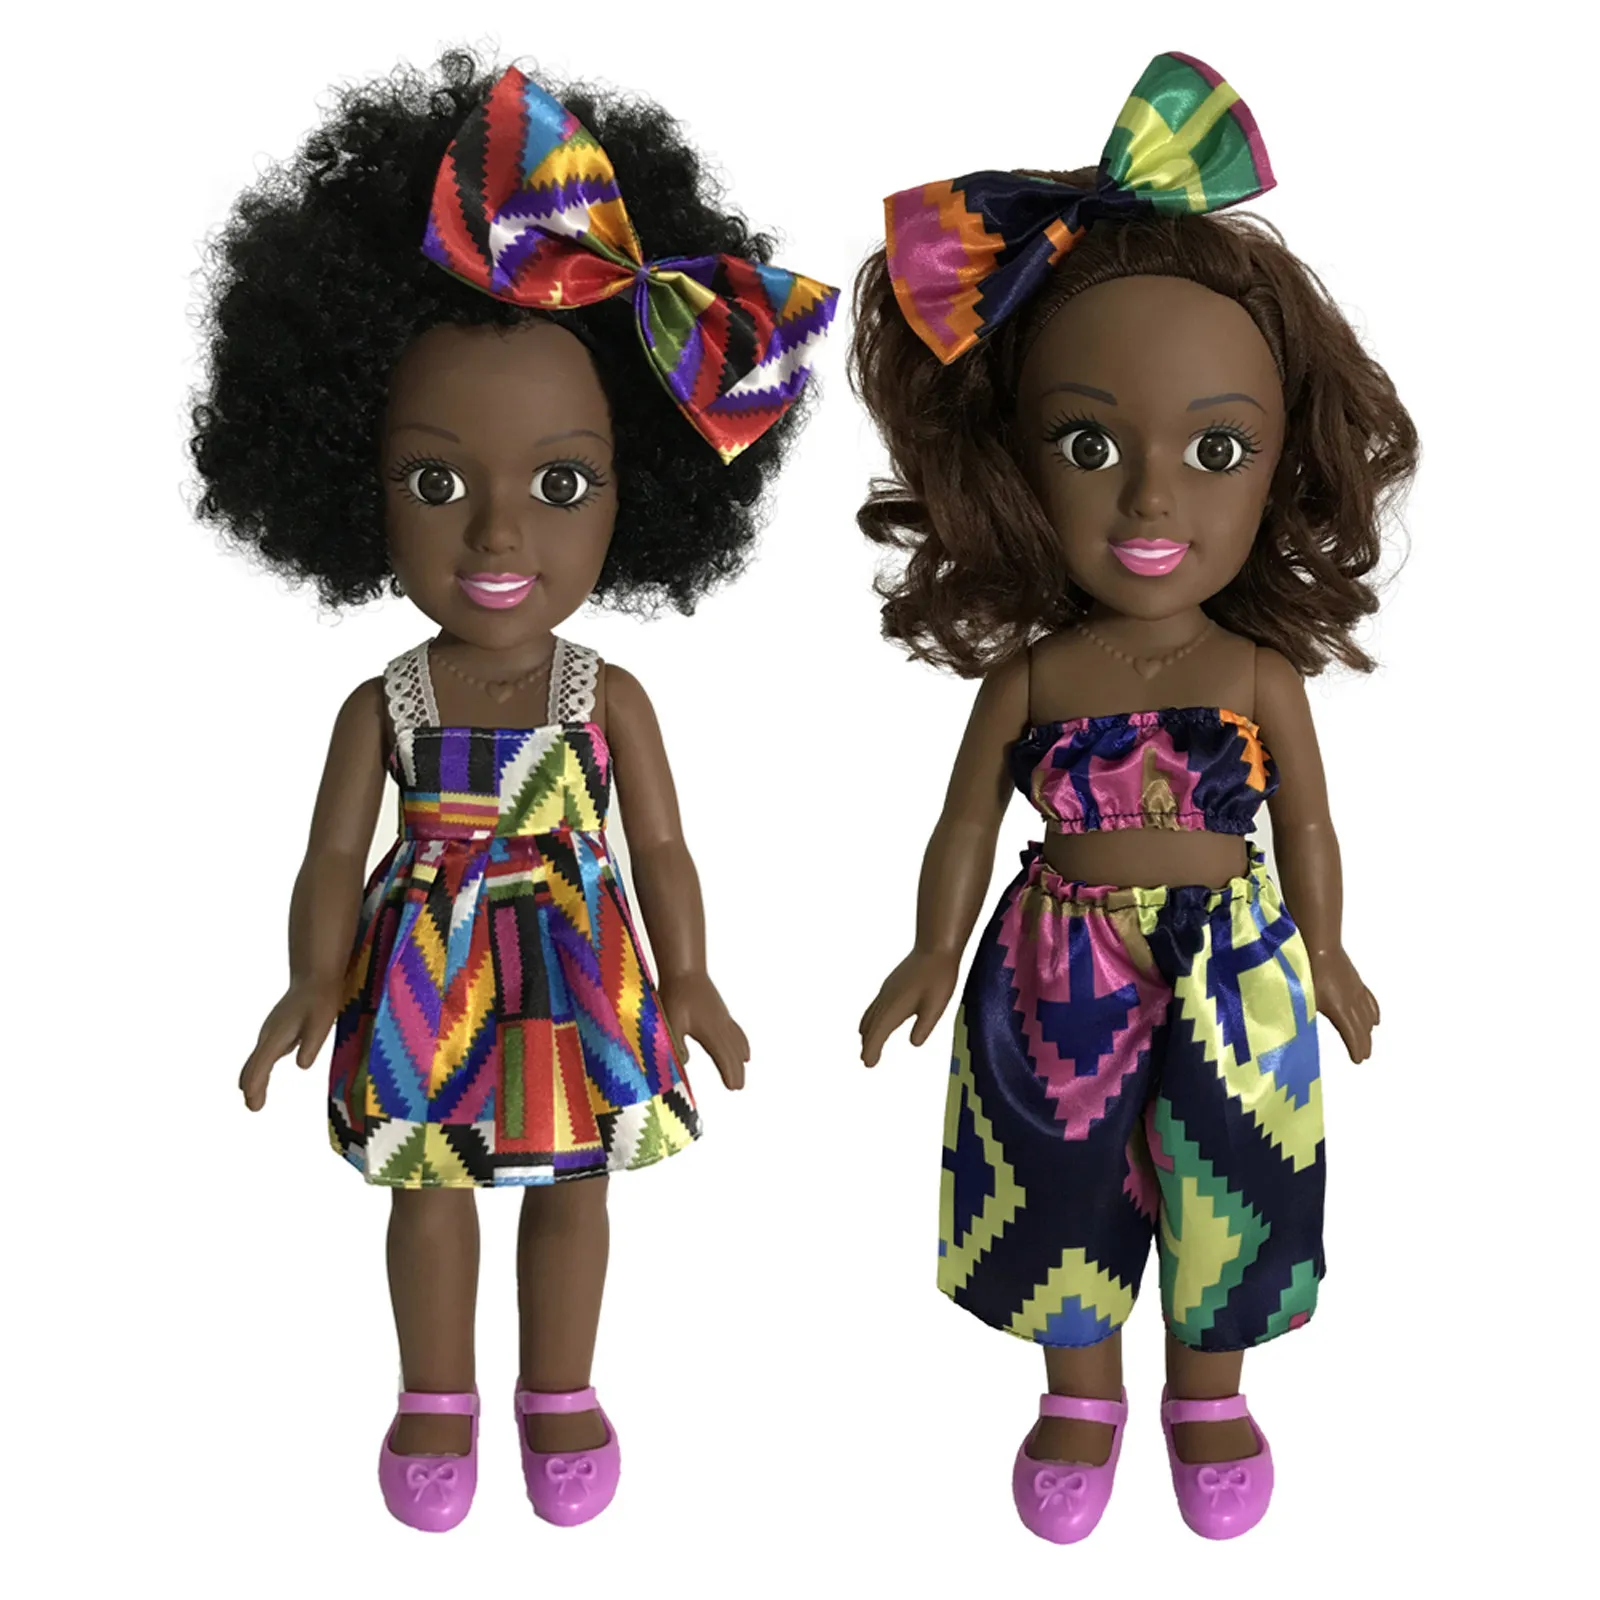 2022 New Baby Dolls For Girls Baby African Doll Toy Black Doll Best Gift Toy Hot Sale Baby Dolls For Kids Toys